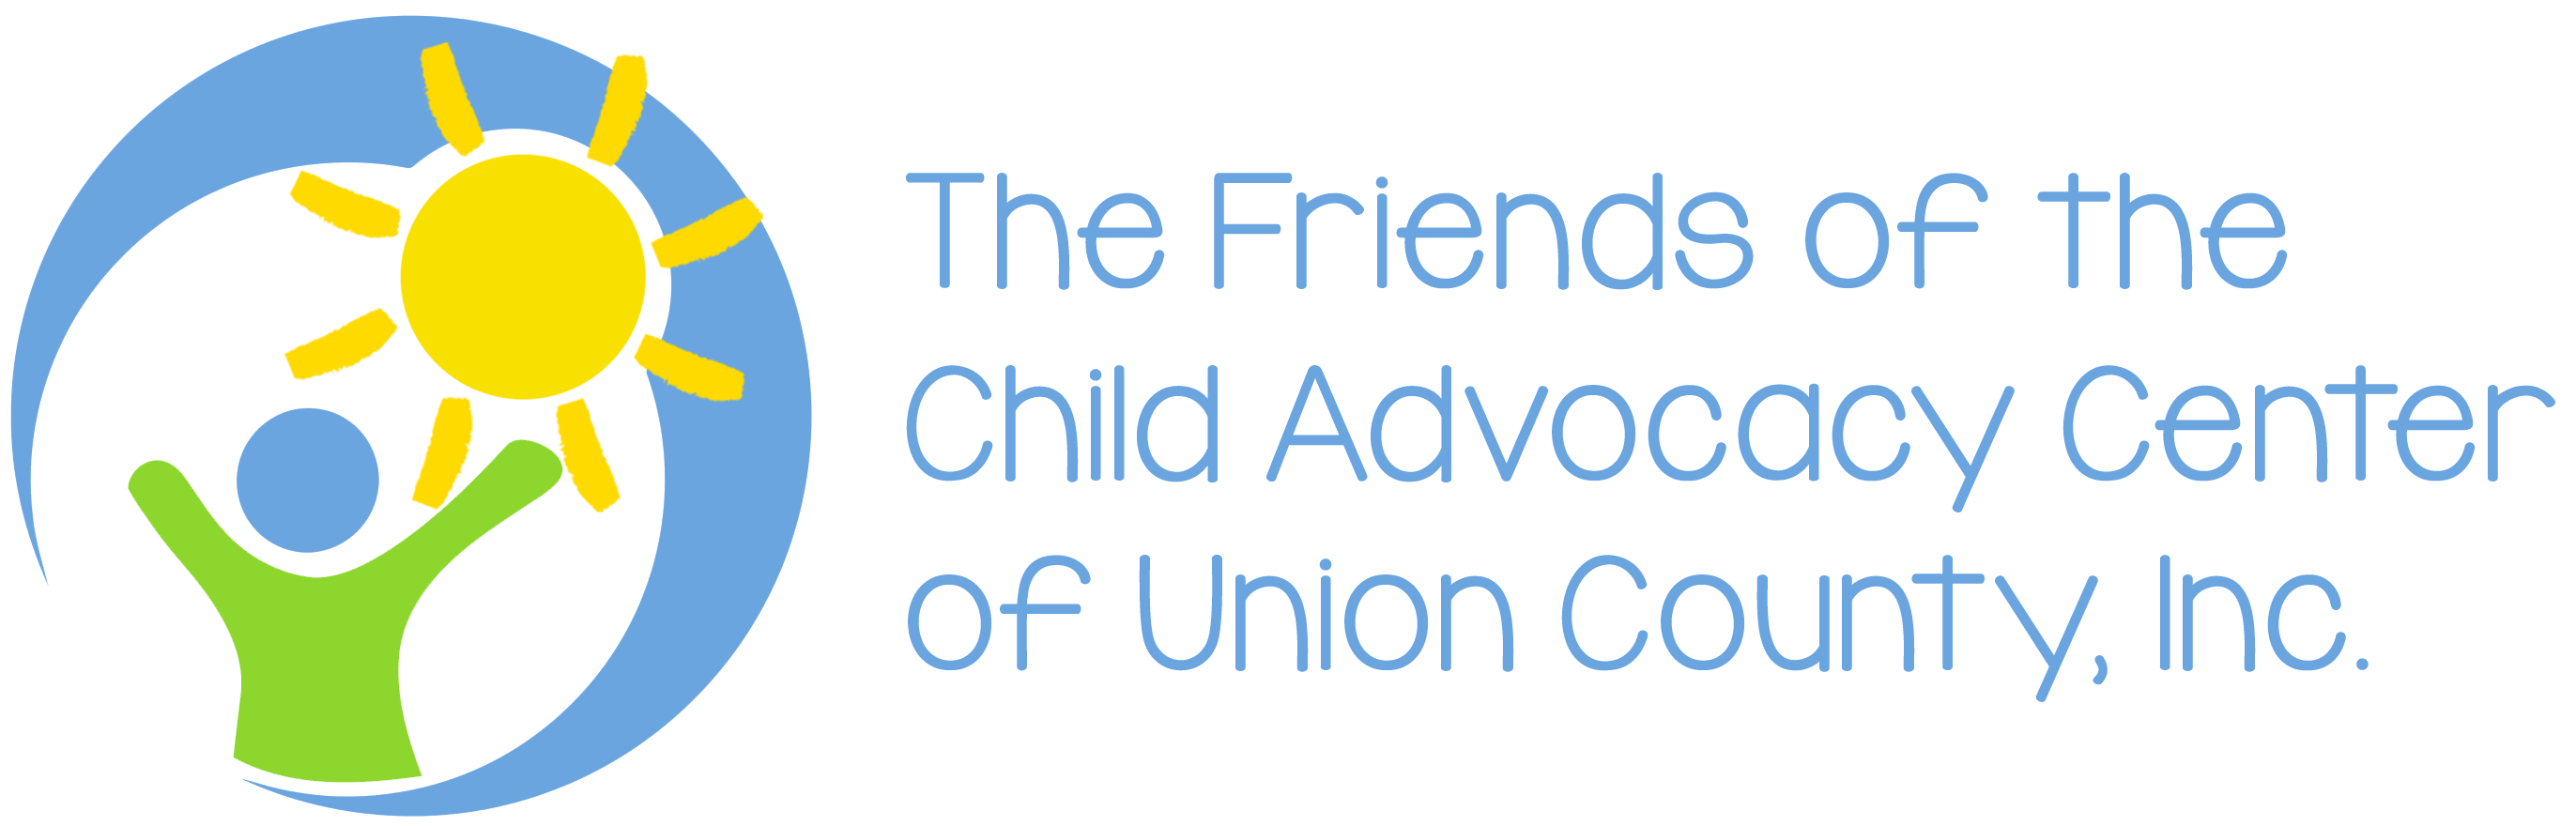 Friends of the Child Advocacy Center of Union County, New Jersey